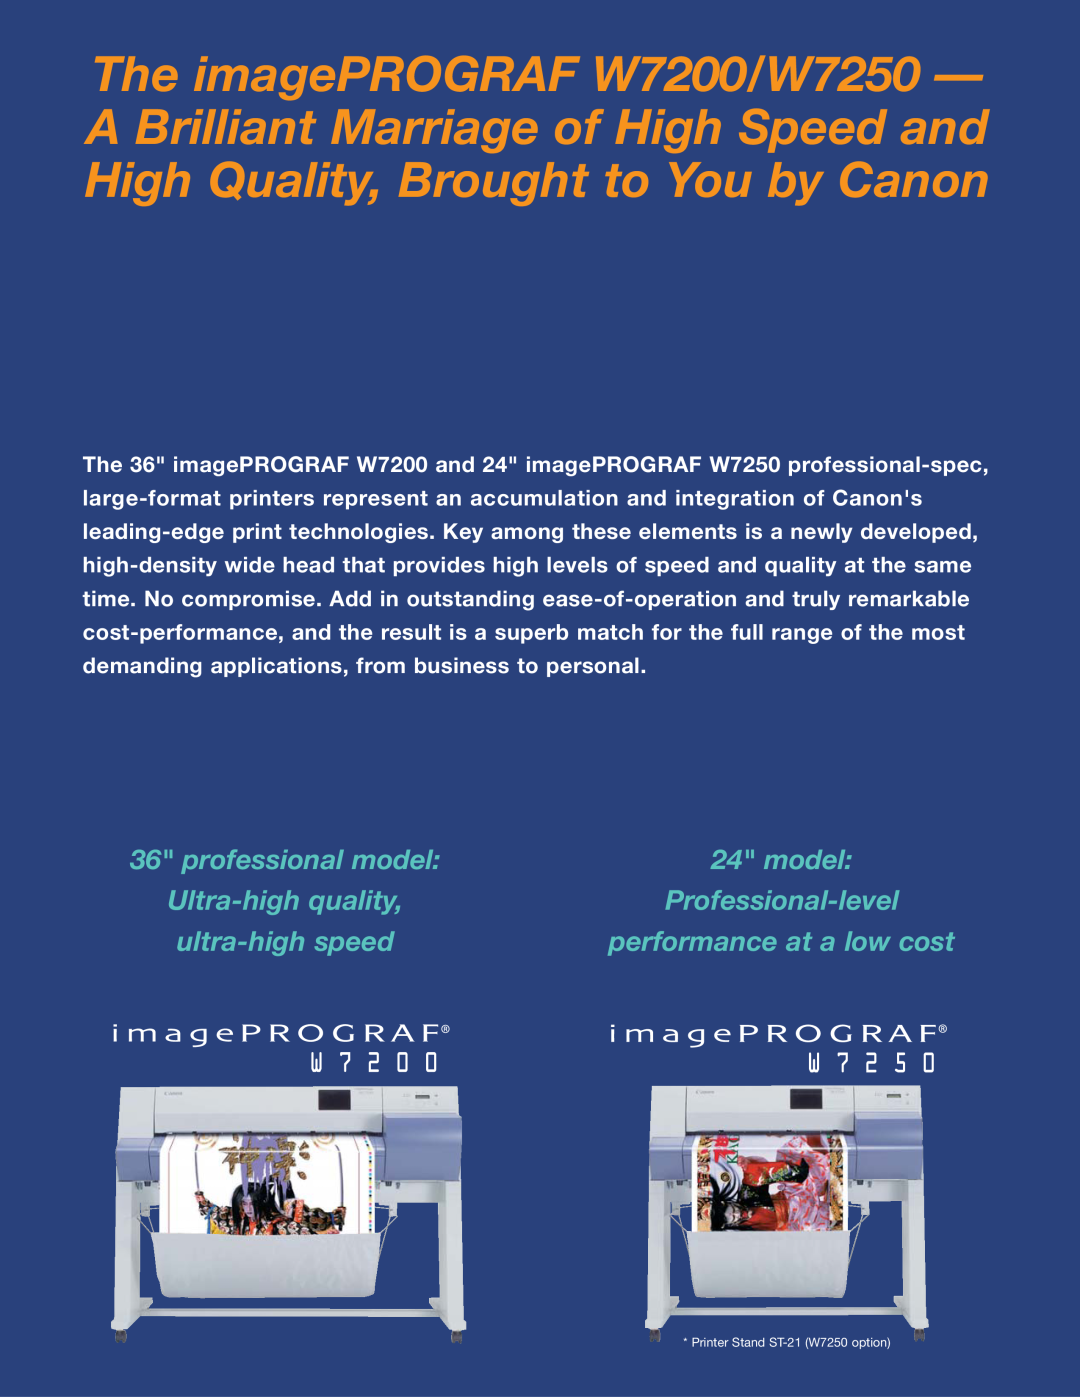 Canon W7200 manual professional model, Ultra-high quality, Professional-level, ultra-high speed, performance at a low cost 